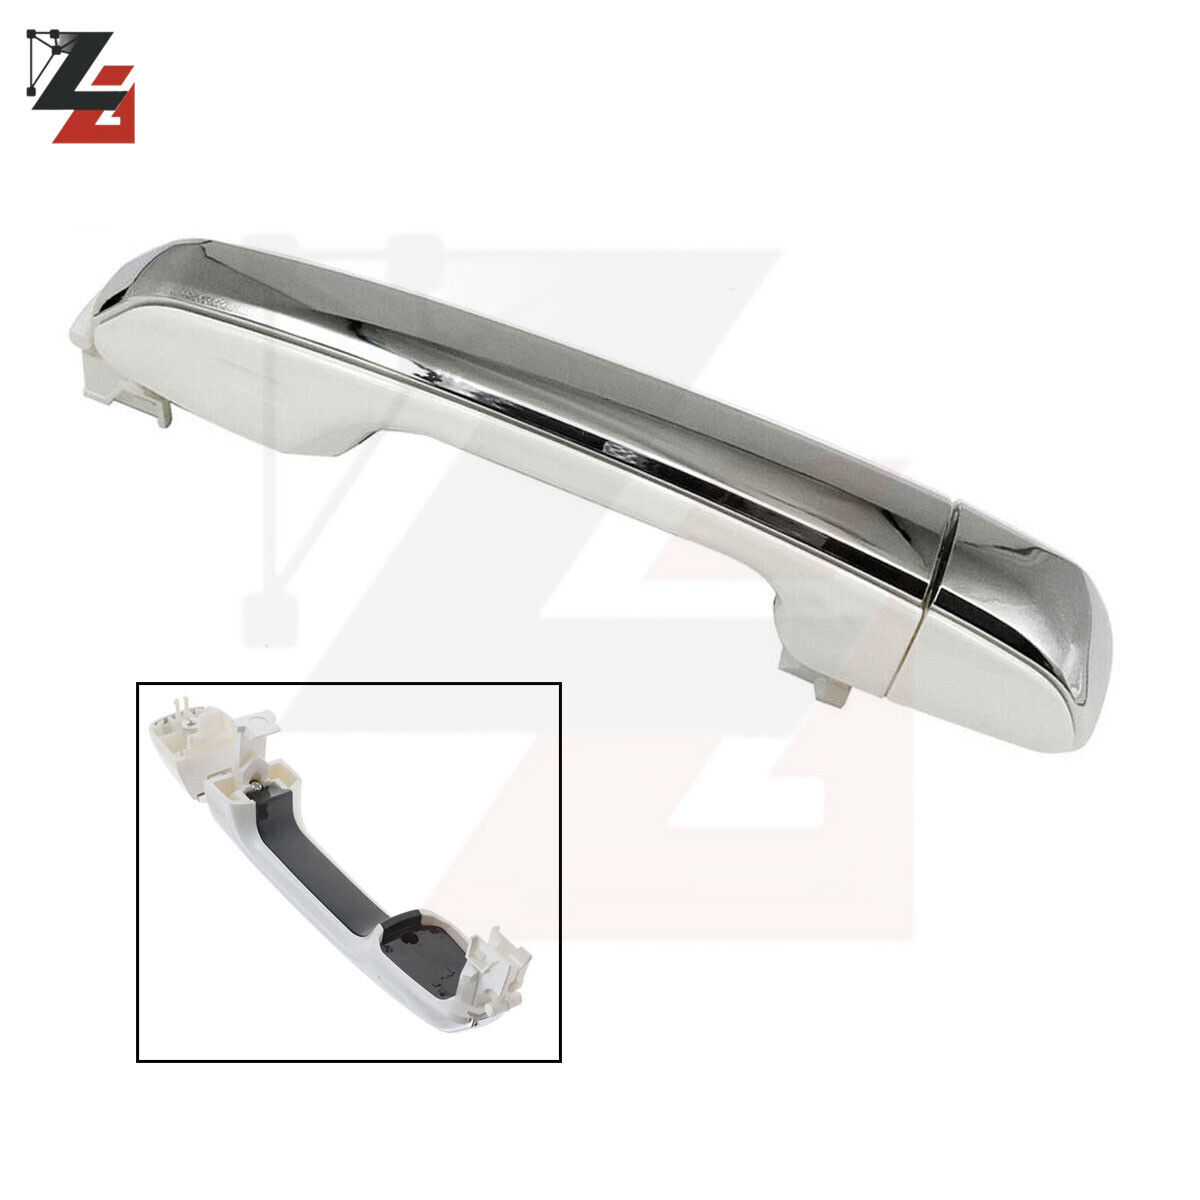 New Outer Rear Door Handle LH or RH Starfire Pearl Fit Lexus GX460 2010-2018